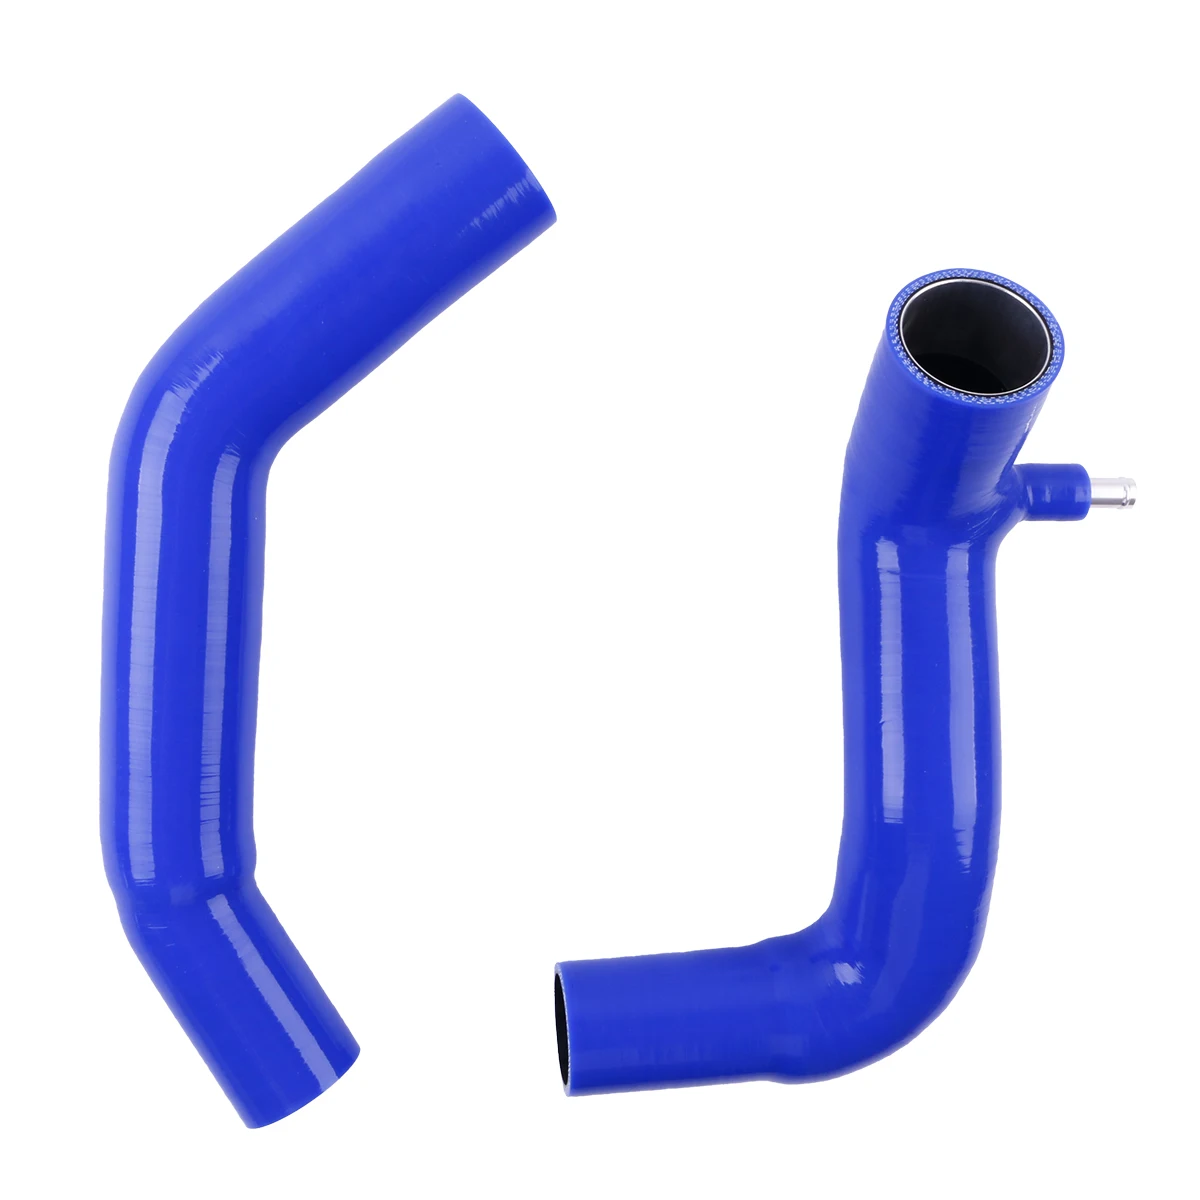 

New Silicone Twin Turbo Hose Pipe Piping Tube Tubing Duct Kit for Mitsubishi GTO 3000GT Dodge Stealth 6G72 3.0L V6 1999 Onwards